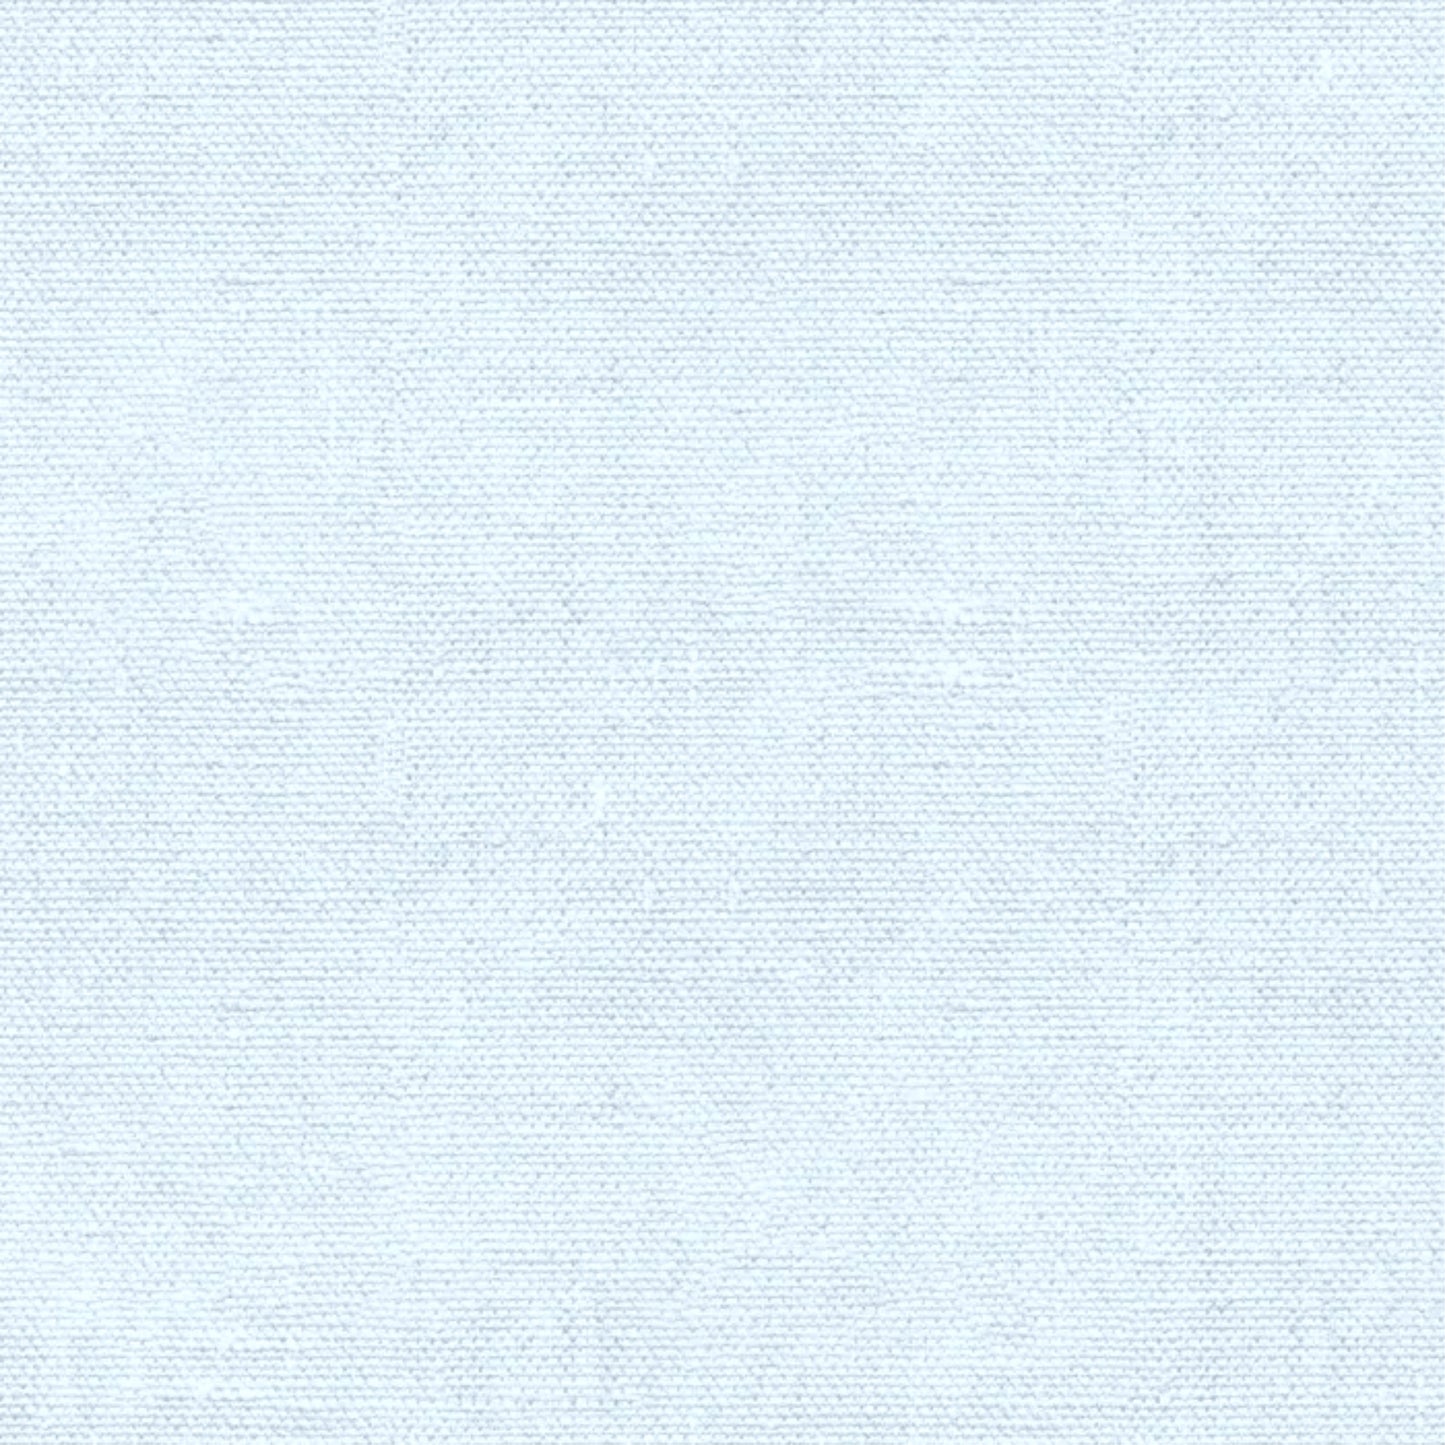 Light blue/grey cotton/linen - (used in Quilter's Cottage)